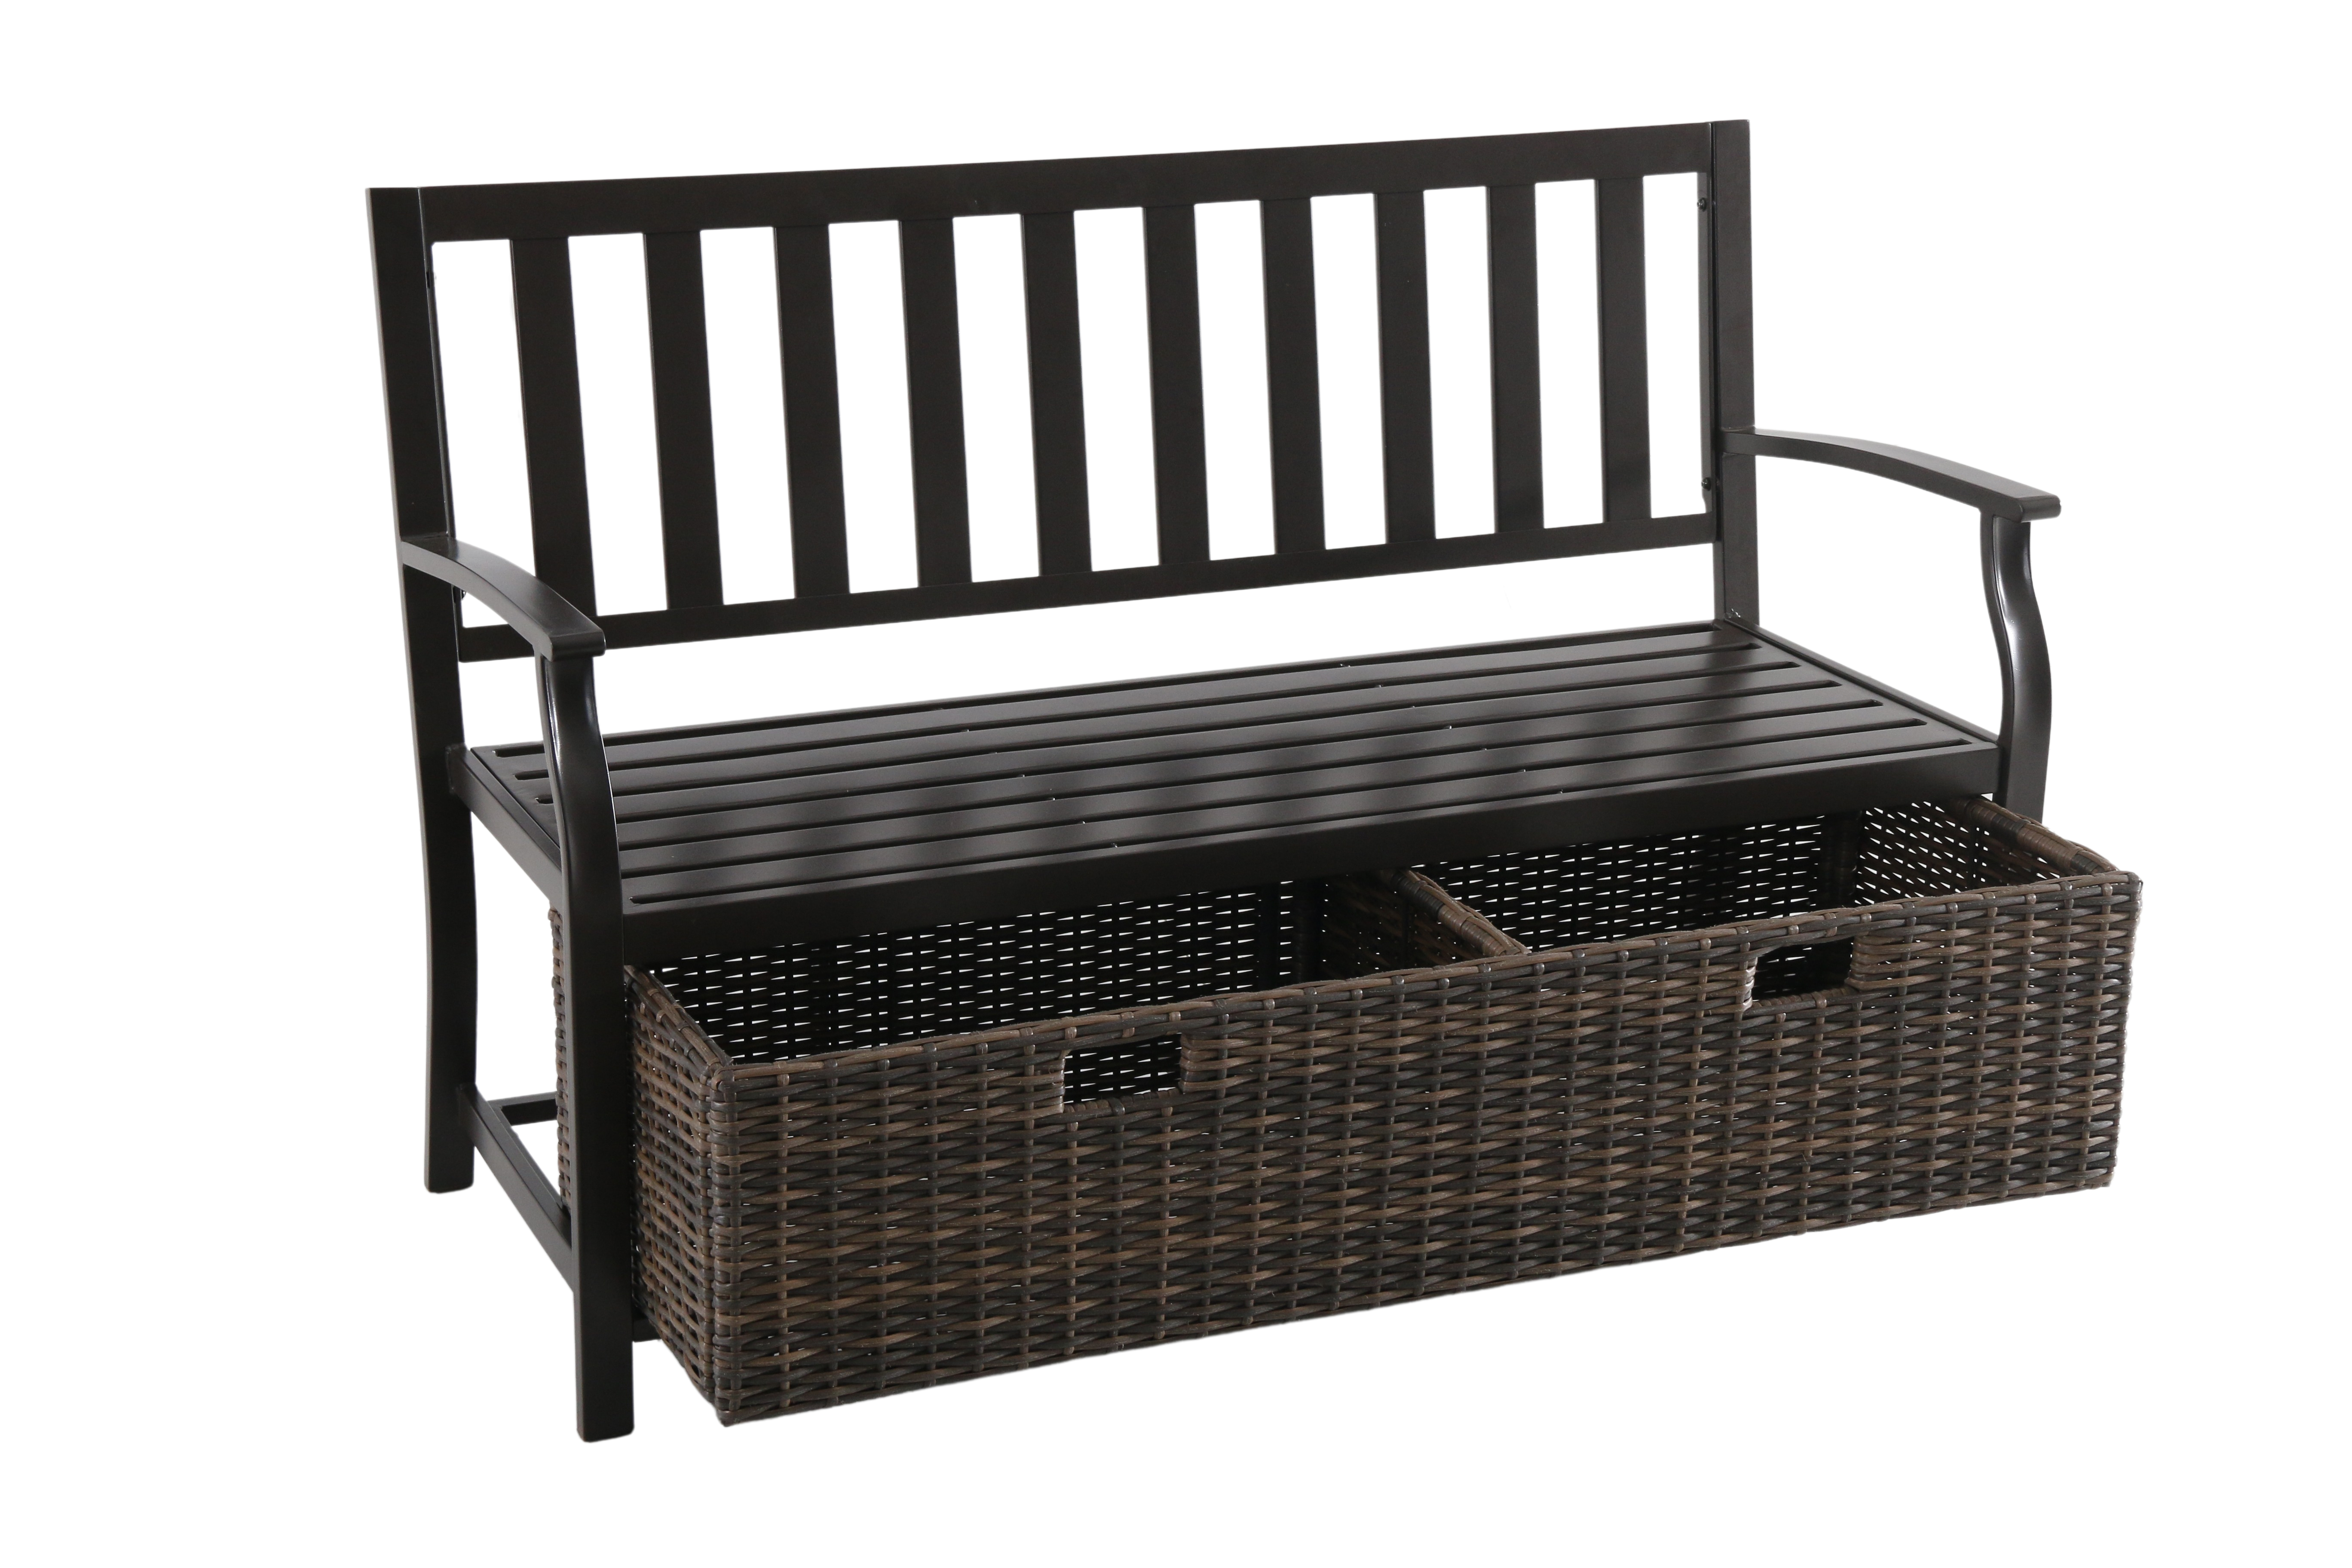 Better Homes & Gardens Camrose Farmhouse Steel Outdoor Bench with Wicker Storage Box, Bronze/Brown - image 4 of 11